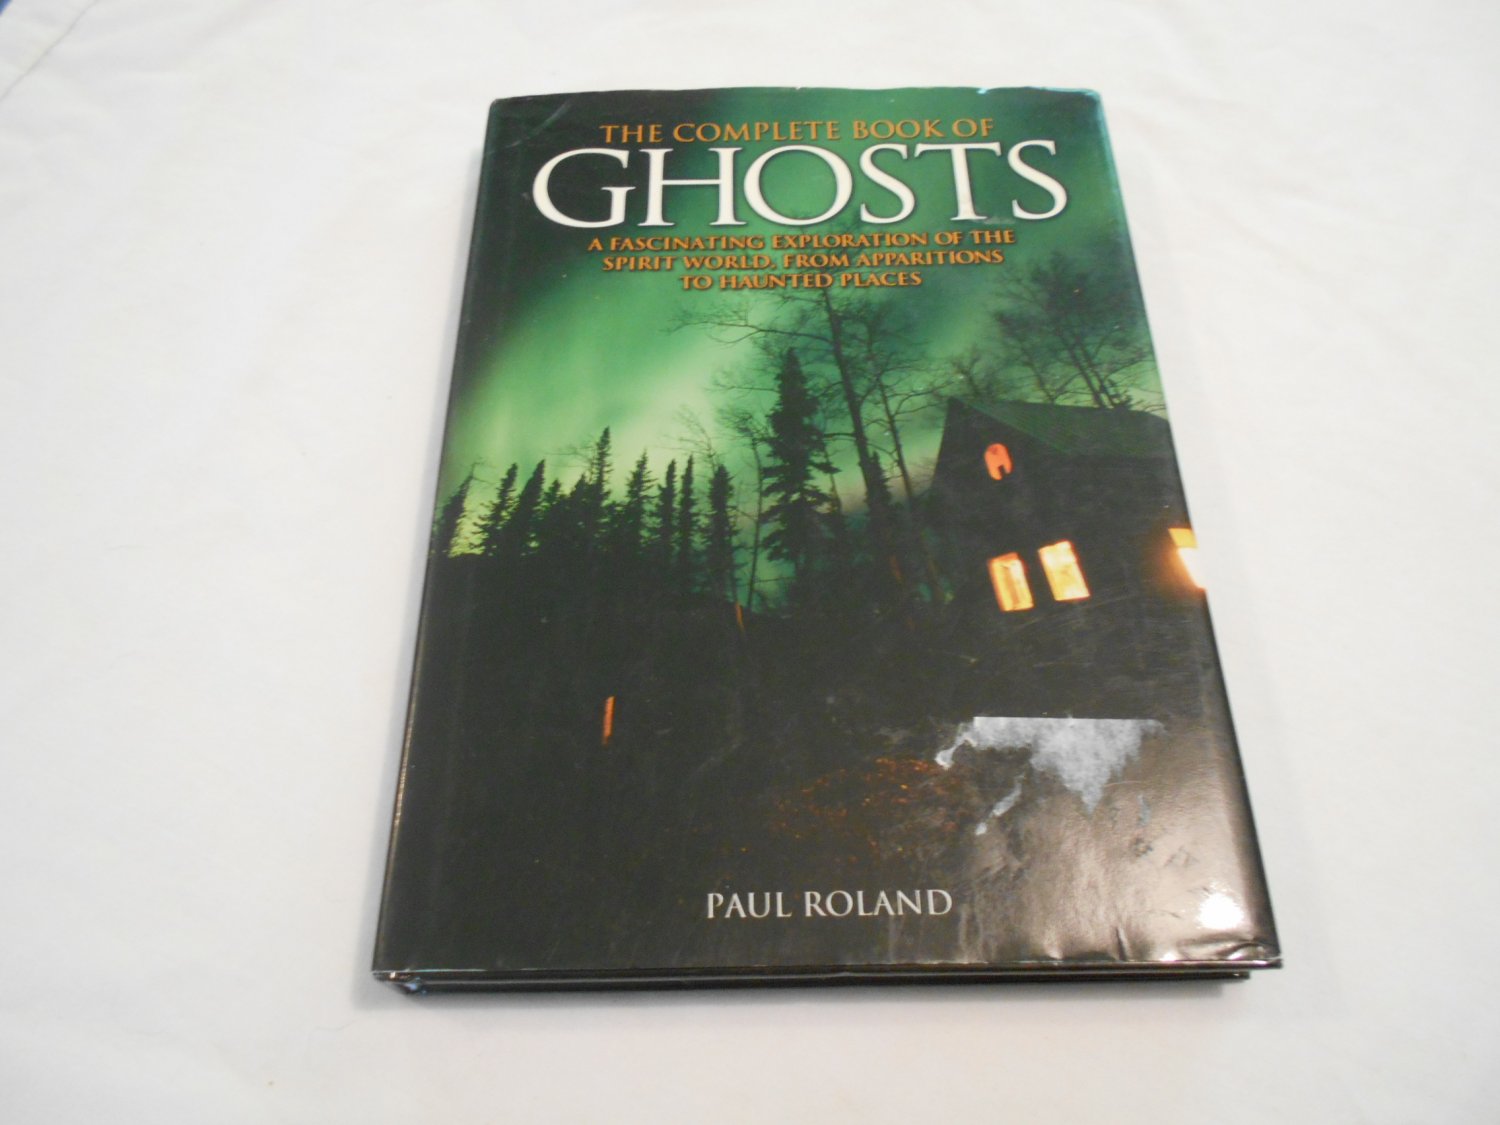 The Complete Book of Ghosts by Paul Roland (2010) (109) Paranormal, Haunted Places